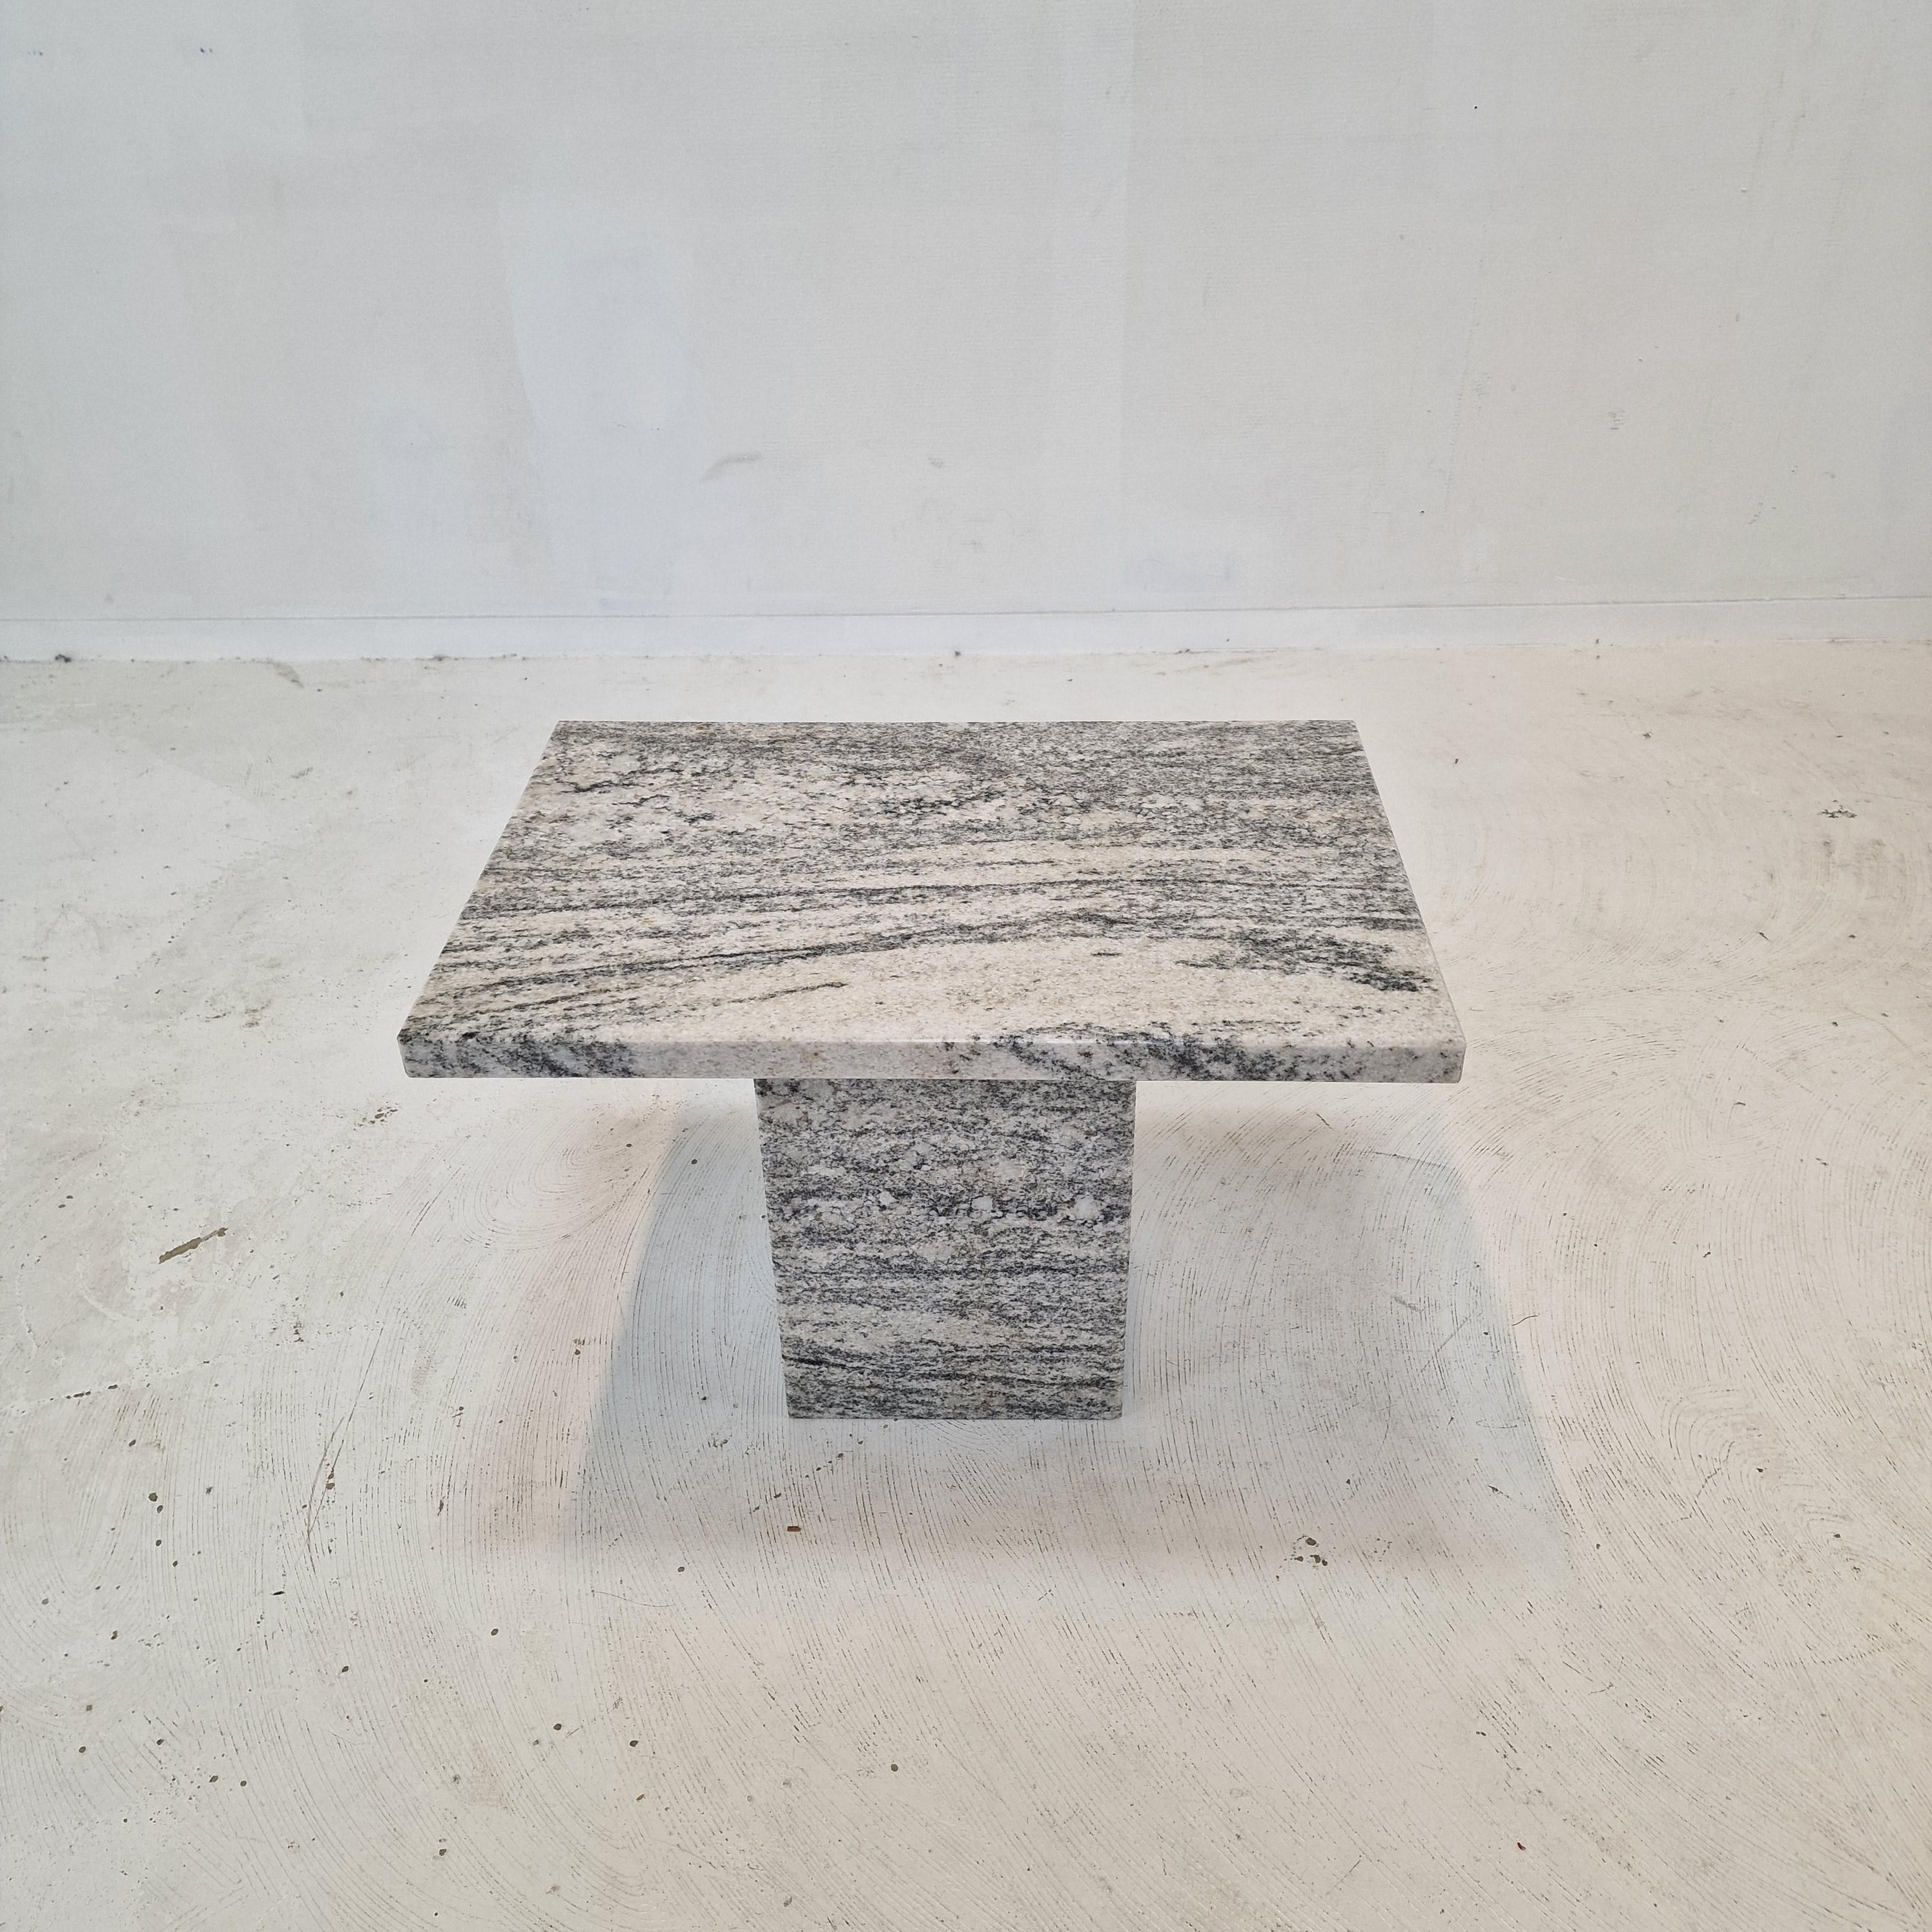 Hand-Crafted Italian Coffee or Side Table in Granite, 1980s For Sale